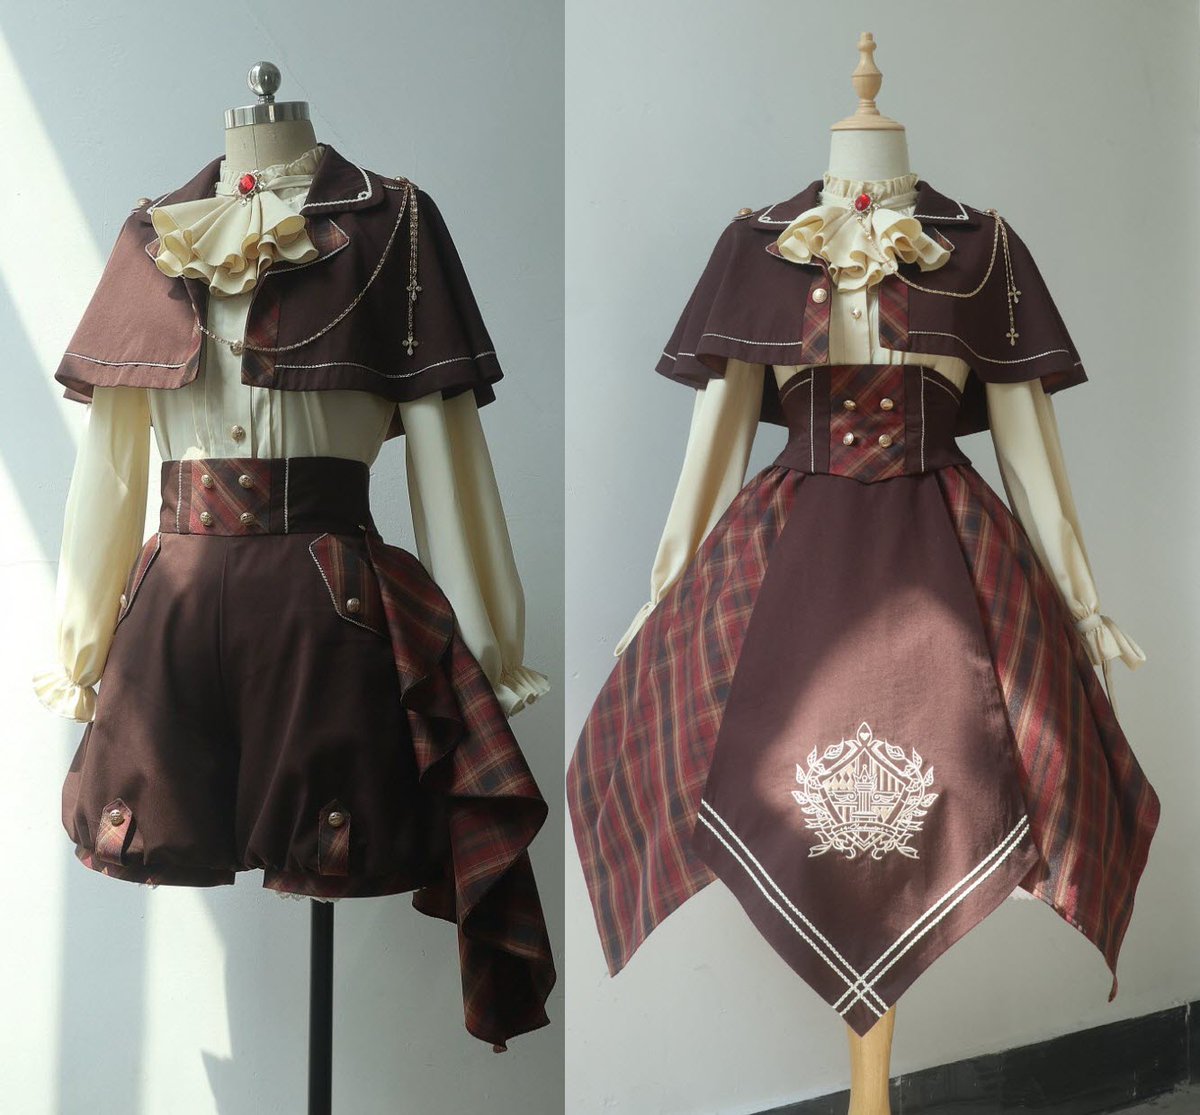 New Release: 【-The Chess Game Between Prince and Princess-】 #Ouji Set and Dress Set ◆ Shopping Link >>> lolitawardrobe.com/the-chess-game…